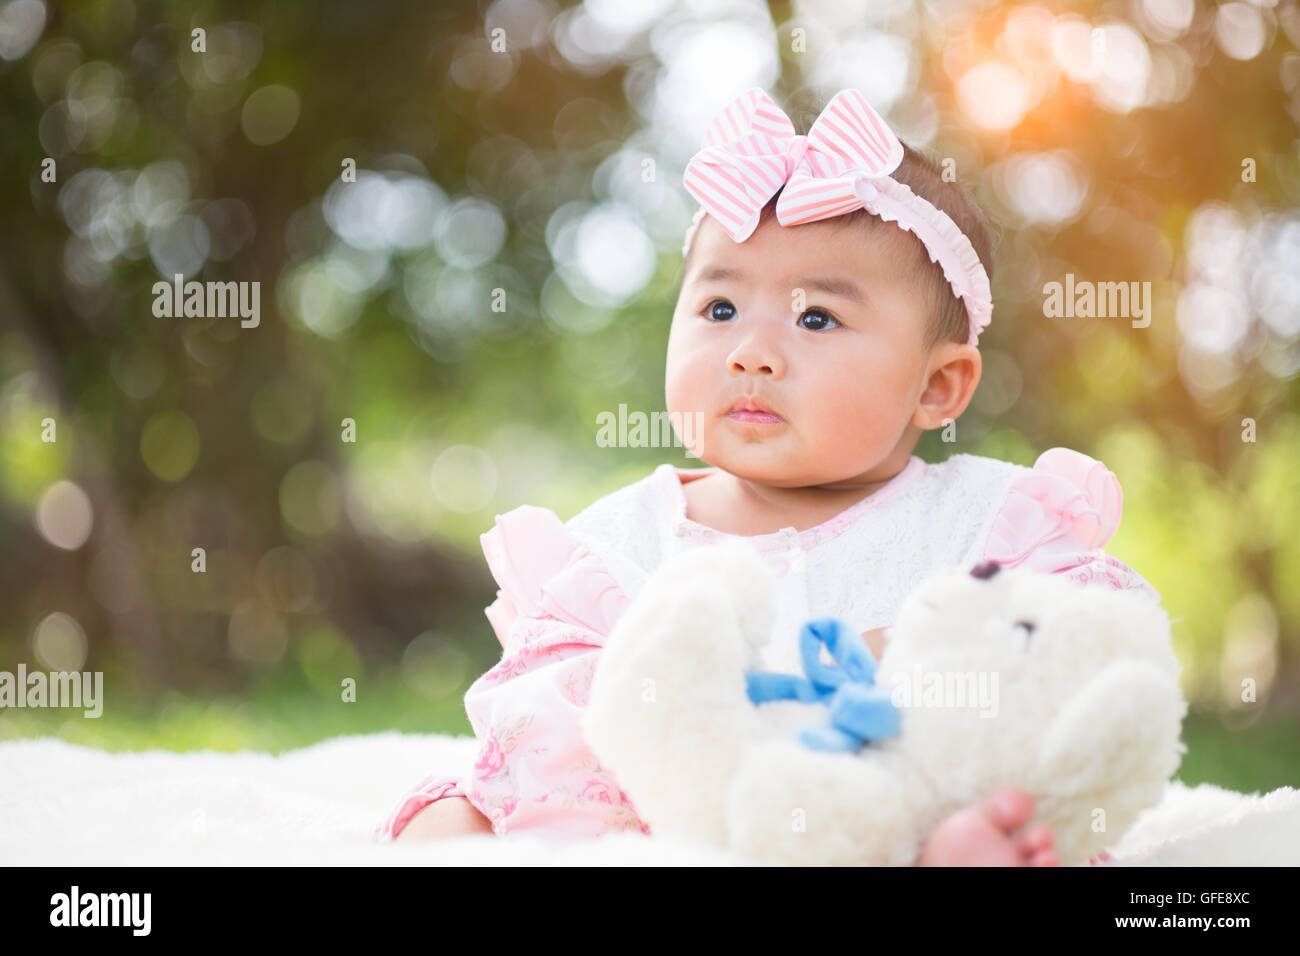 happy smiling cute little girl child outdoors in summer day Stock Photo